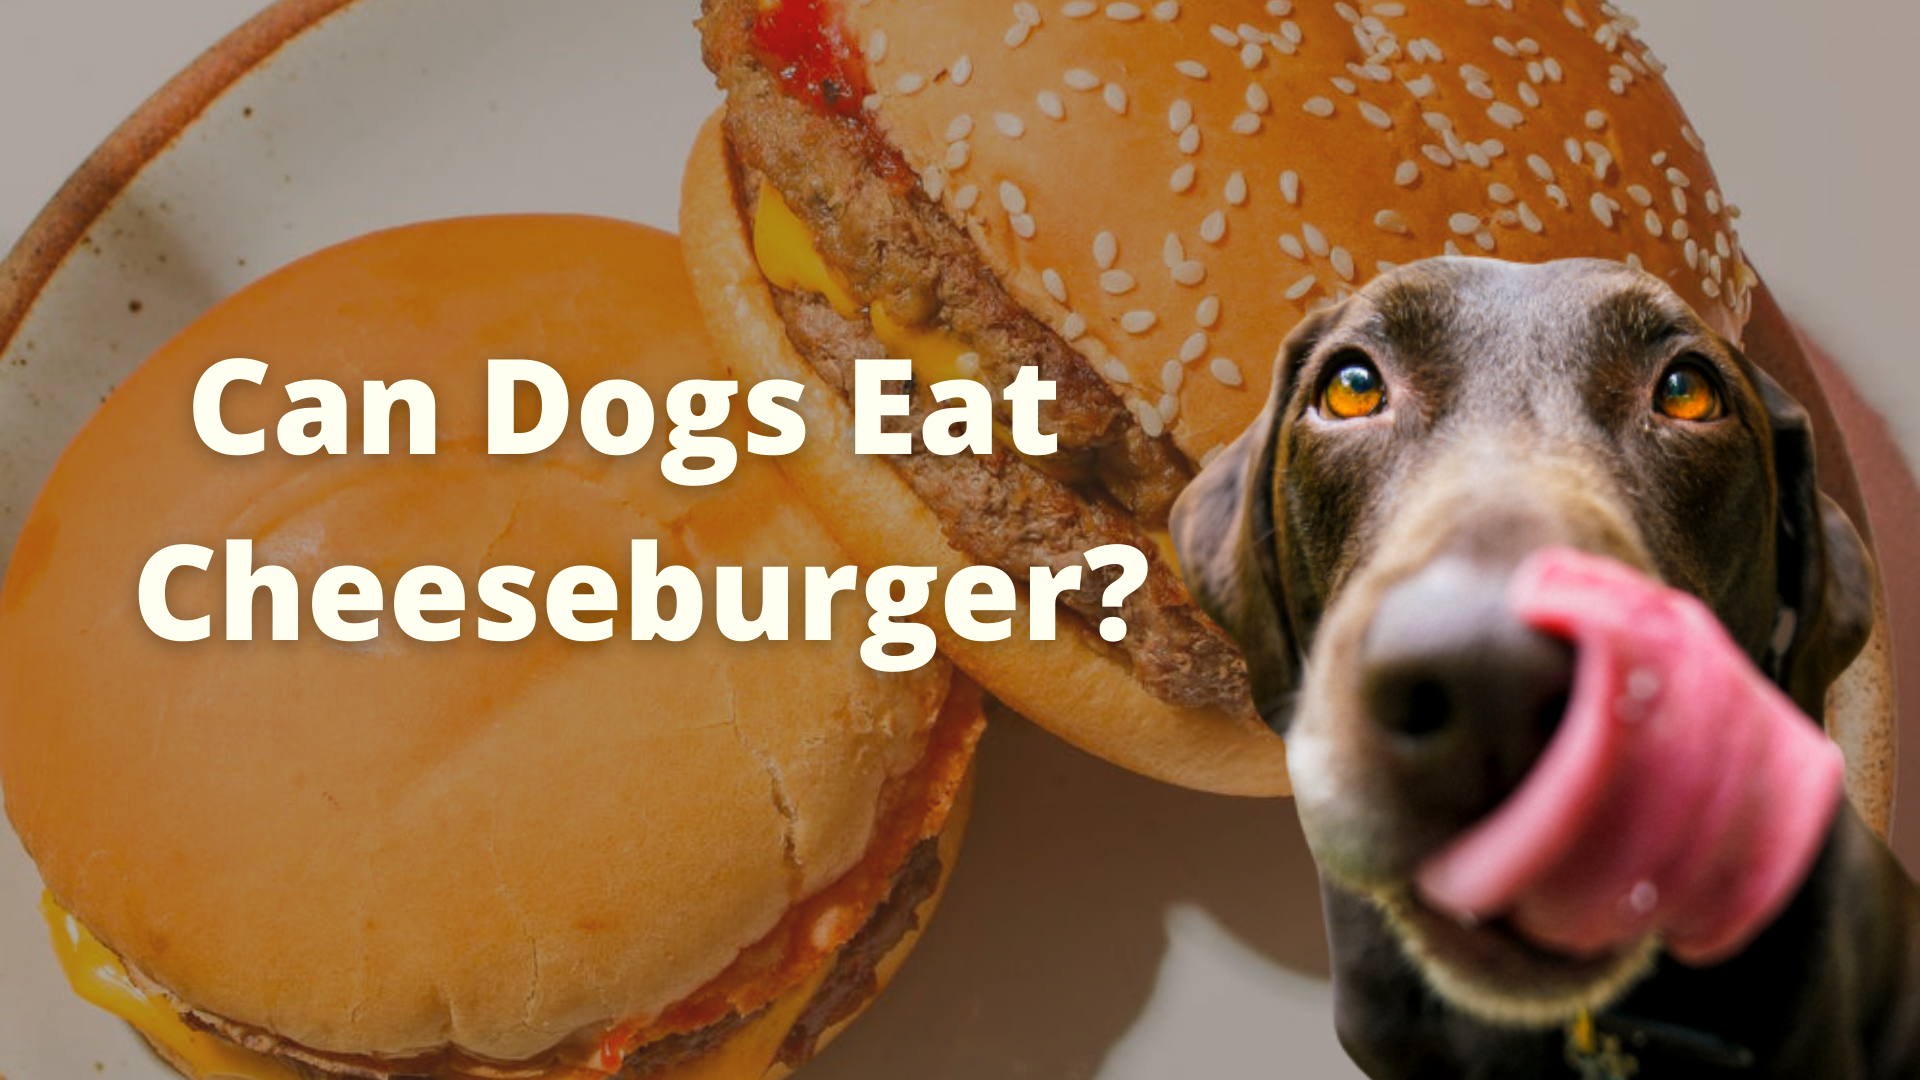 McDonald's Food: Can Dogs Eat Cheeseburger? Is It Harmful?